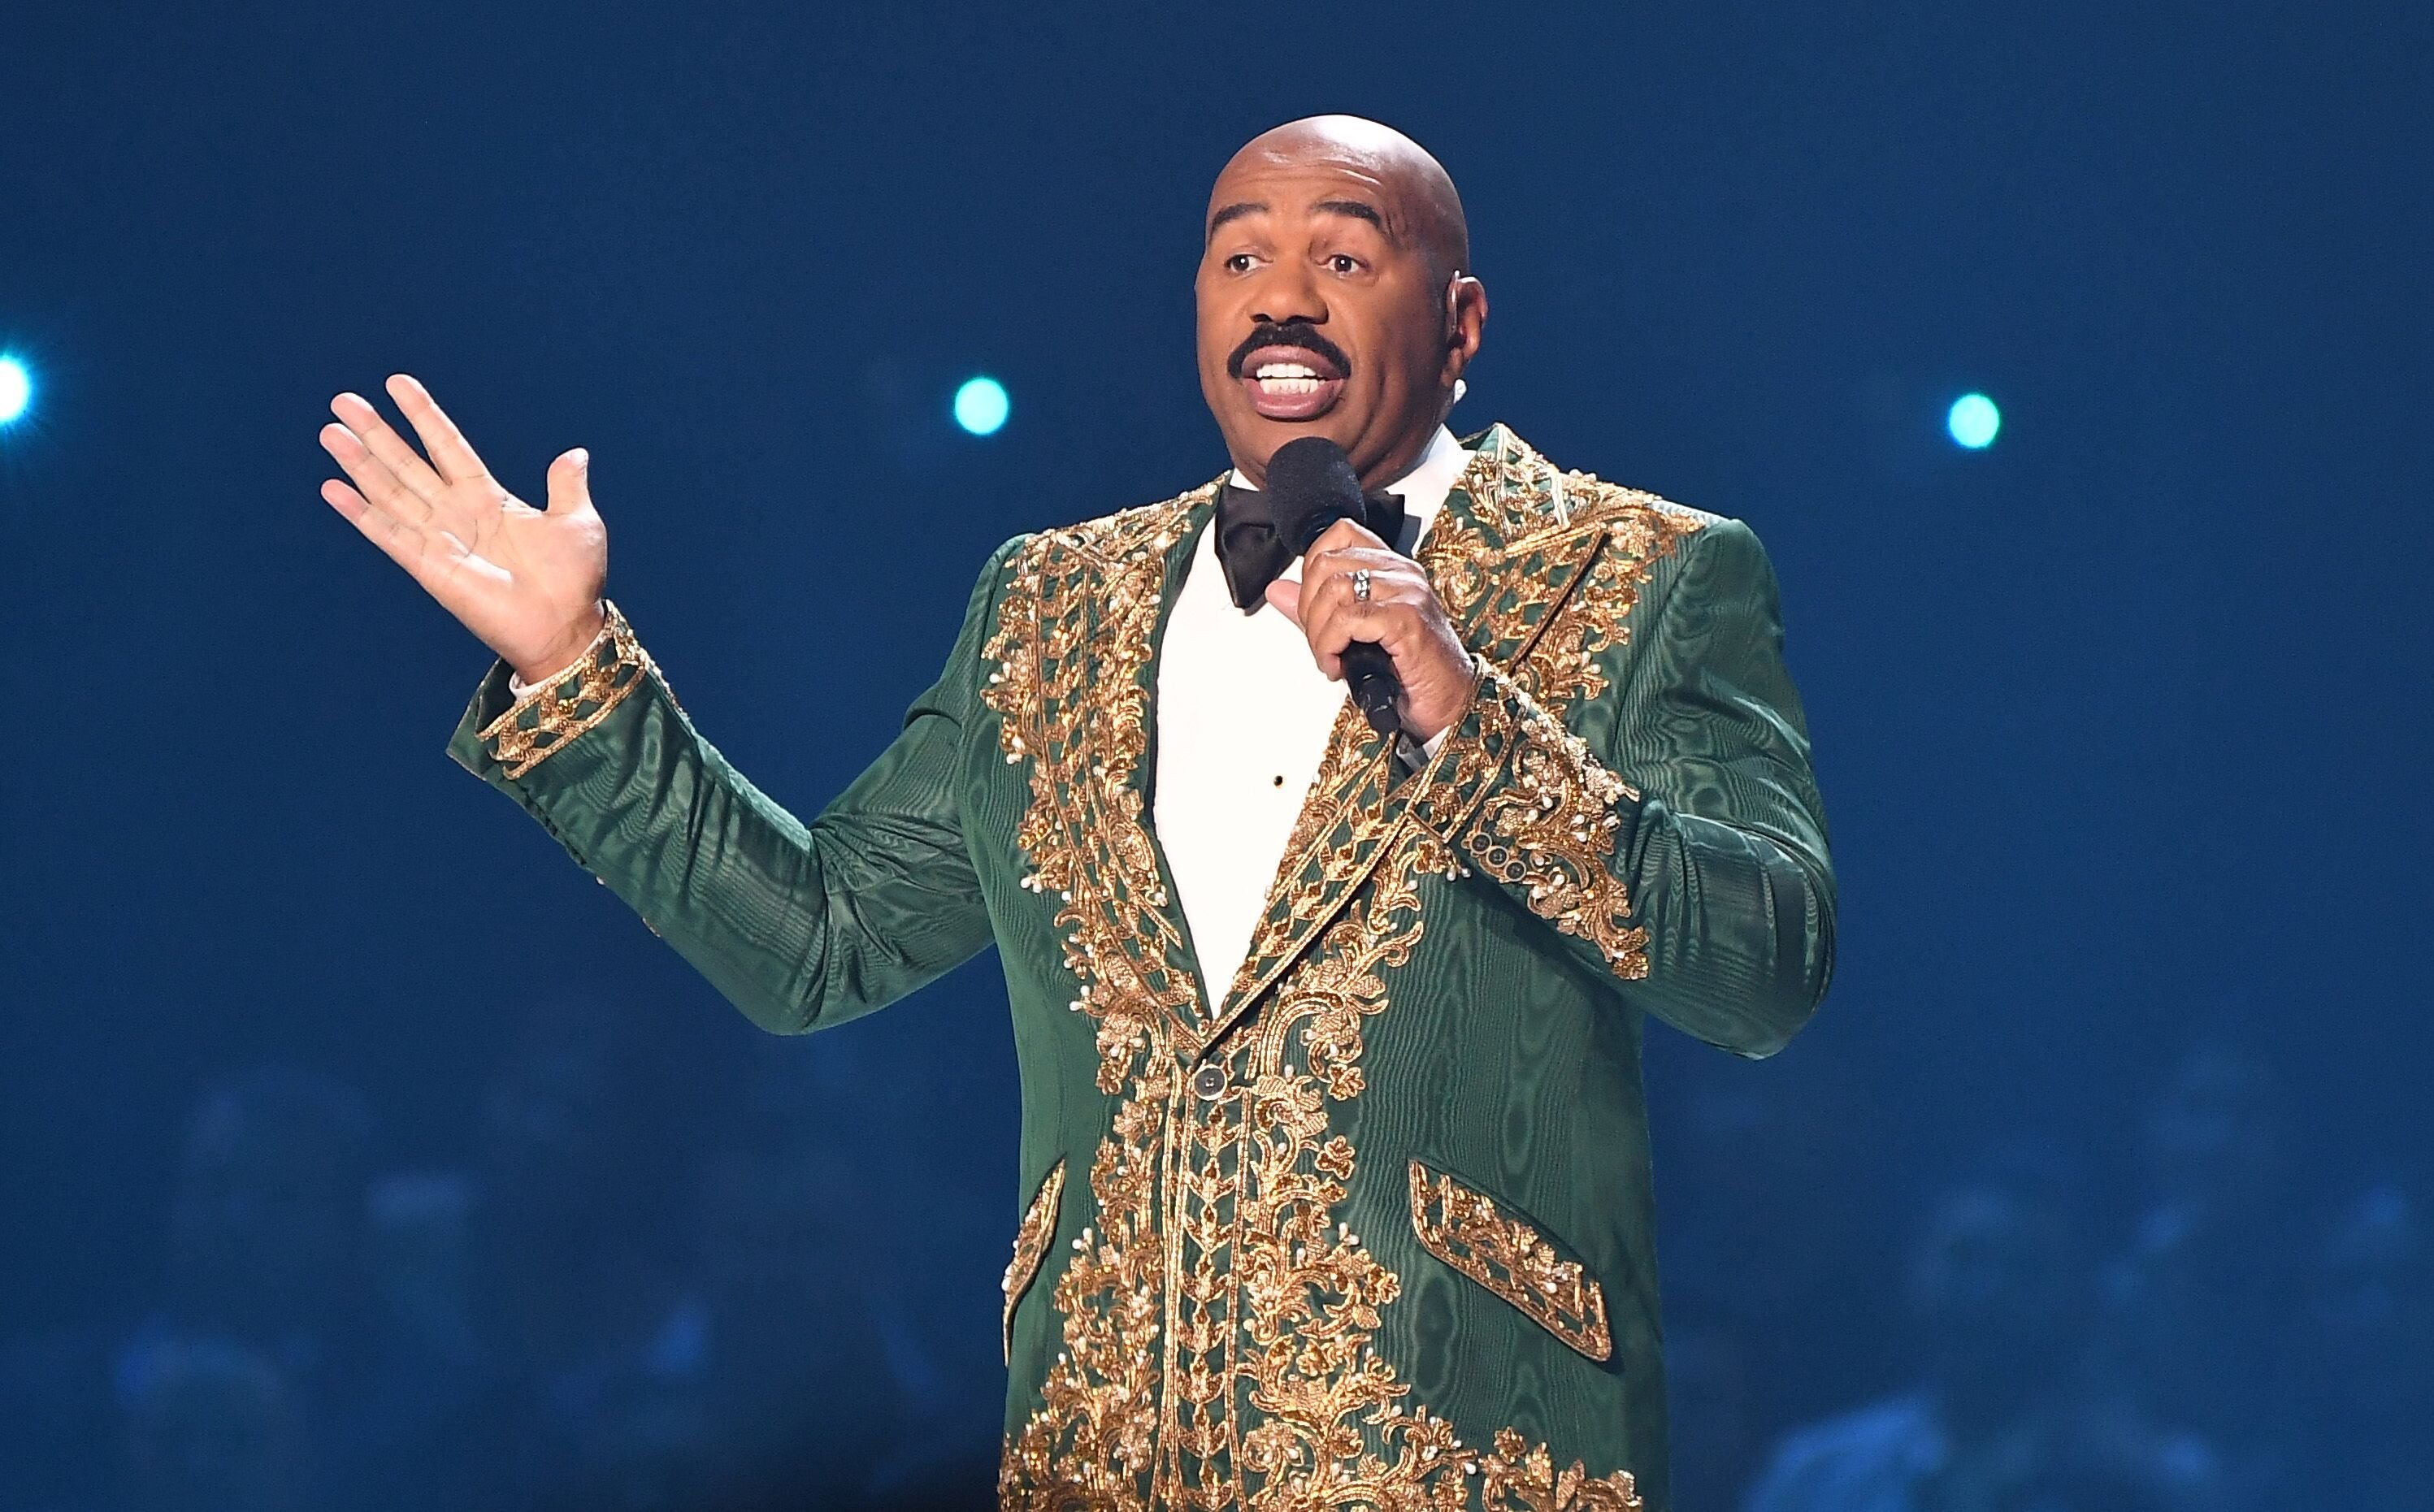 Steve Harvey hosting the Miss Universe Pageant on December 8, 2019 | Photo: Getty Images